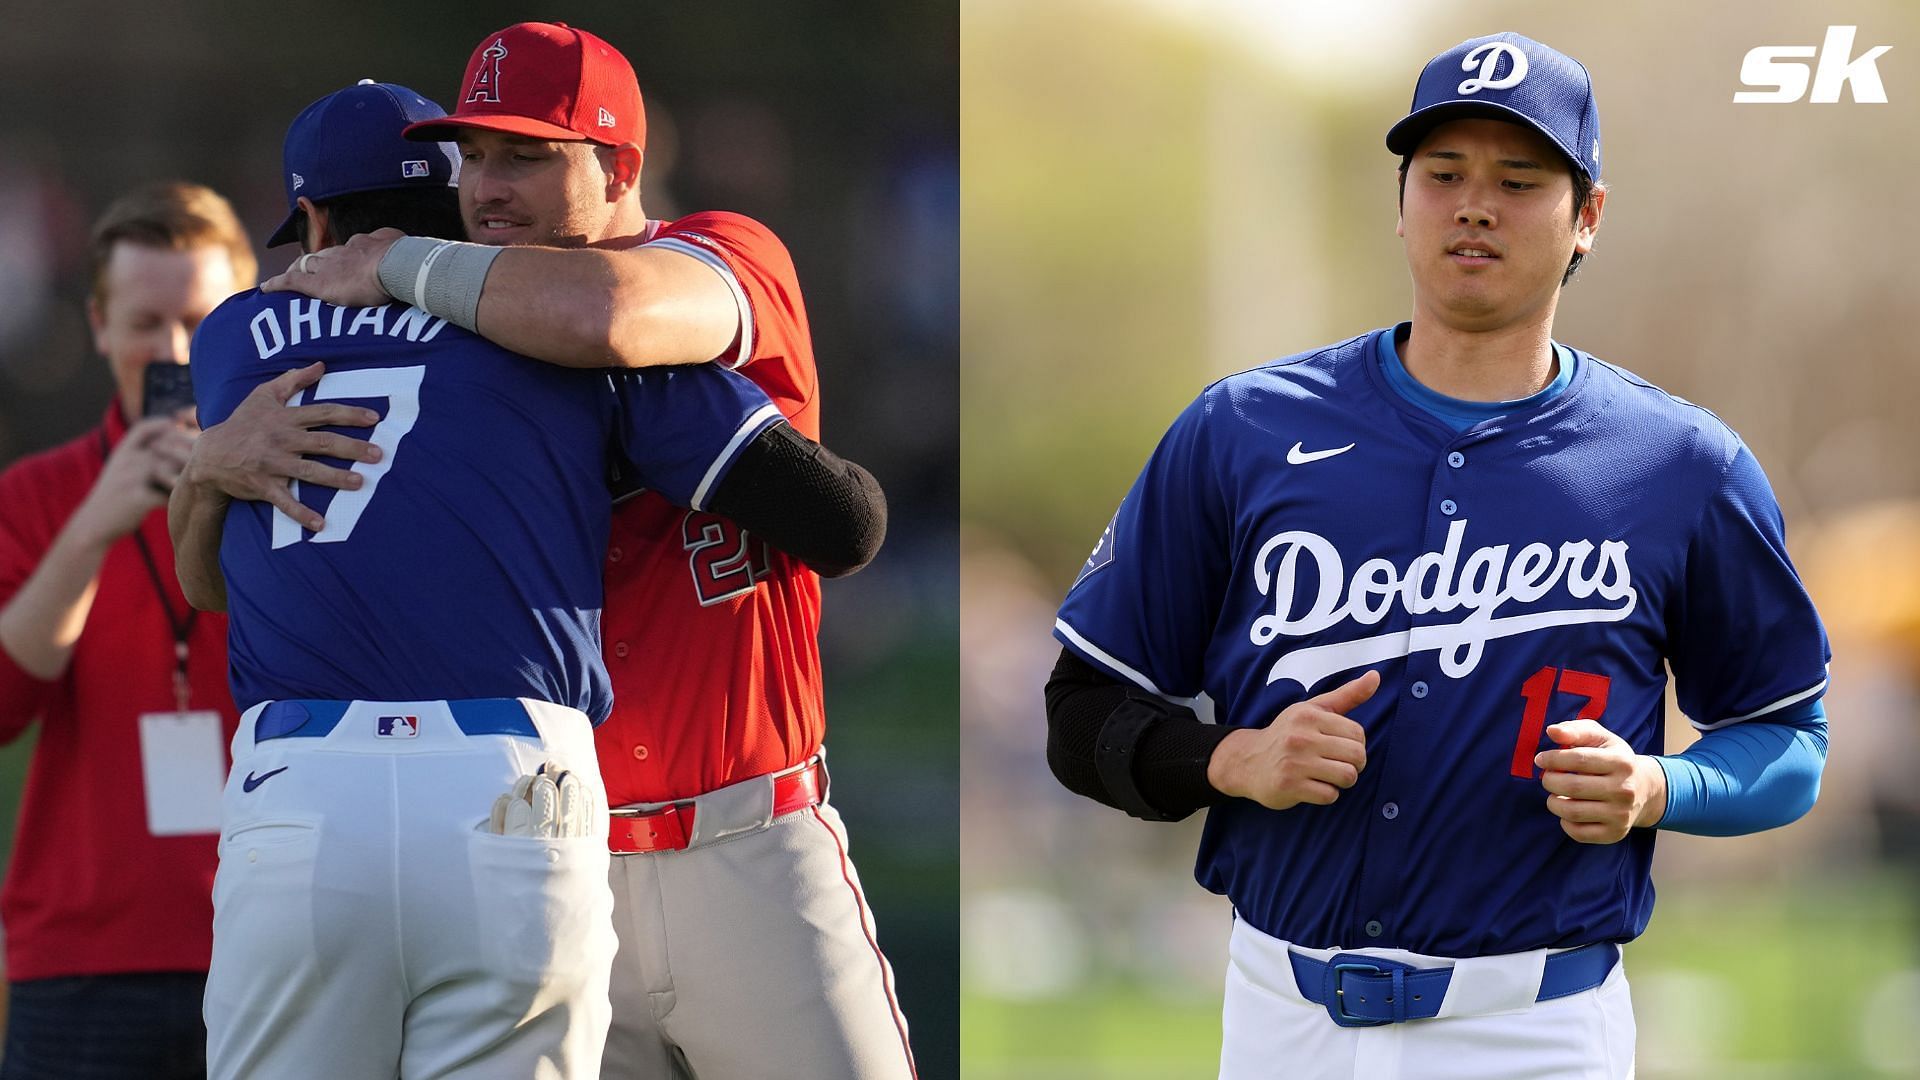 Can make a grown man shed a tear" - MLB fans react to Shohei Ohtani and Mike  Trout's wholesome reunion during spring training